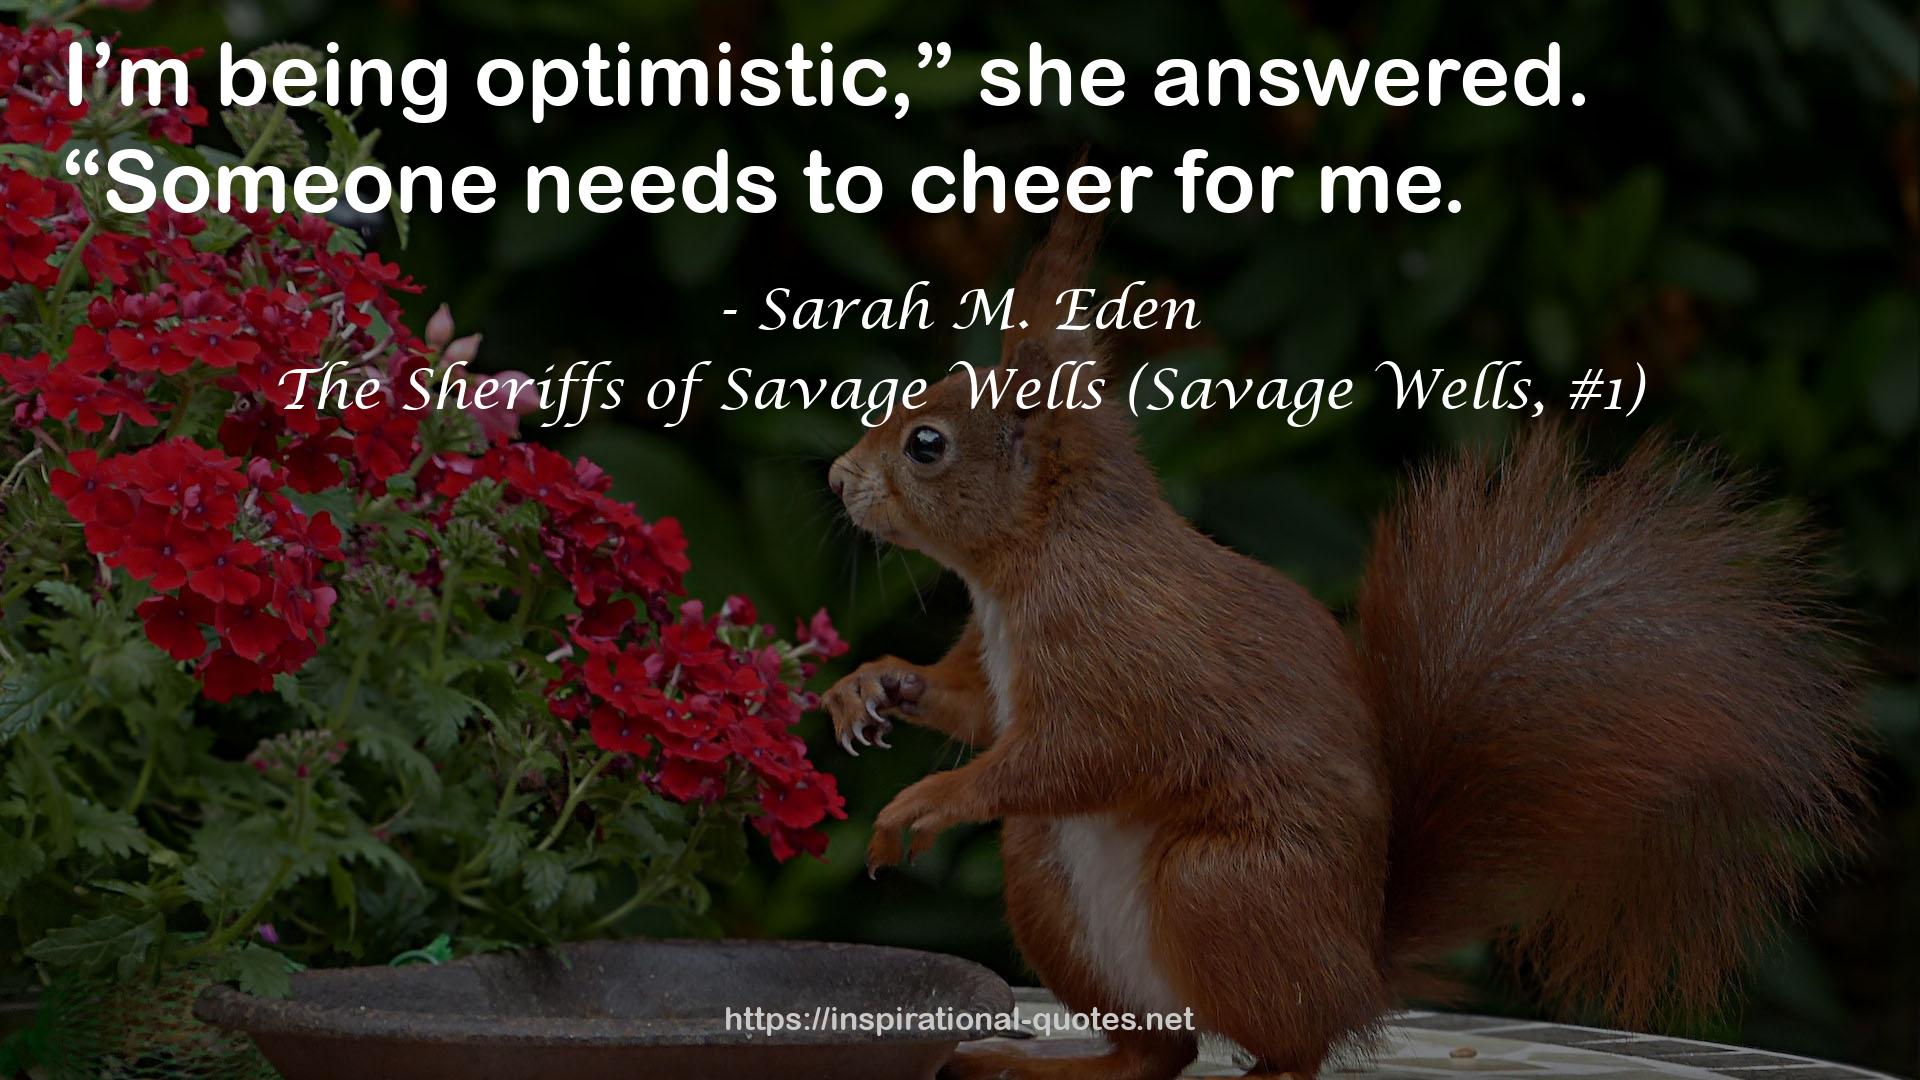 The Sheriffs of Savage Wells (Savage Wells, #1) QUOTES